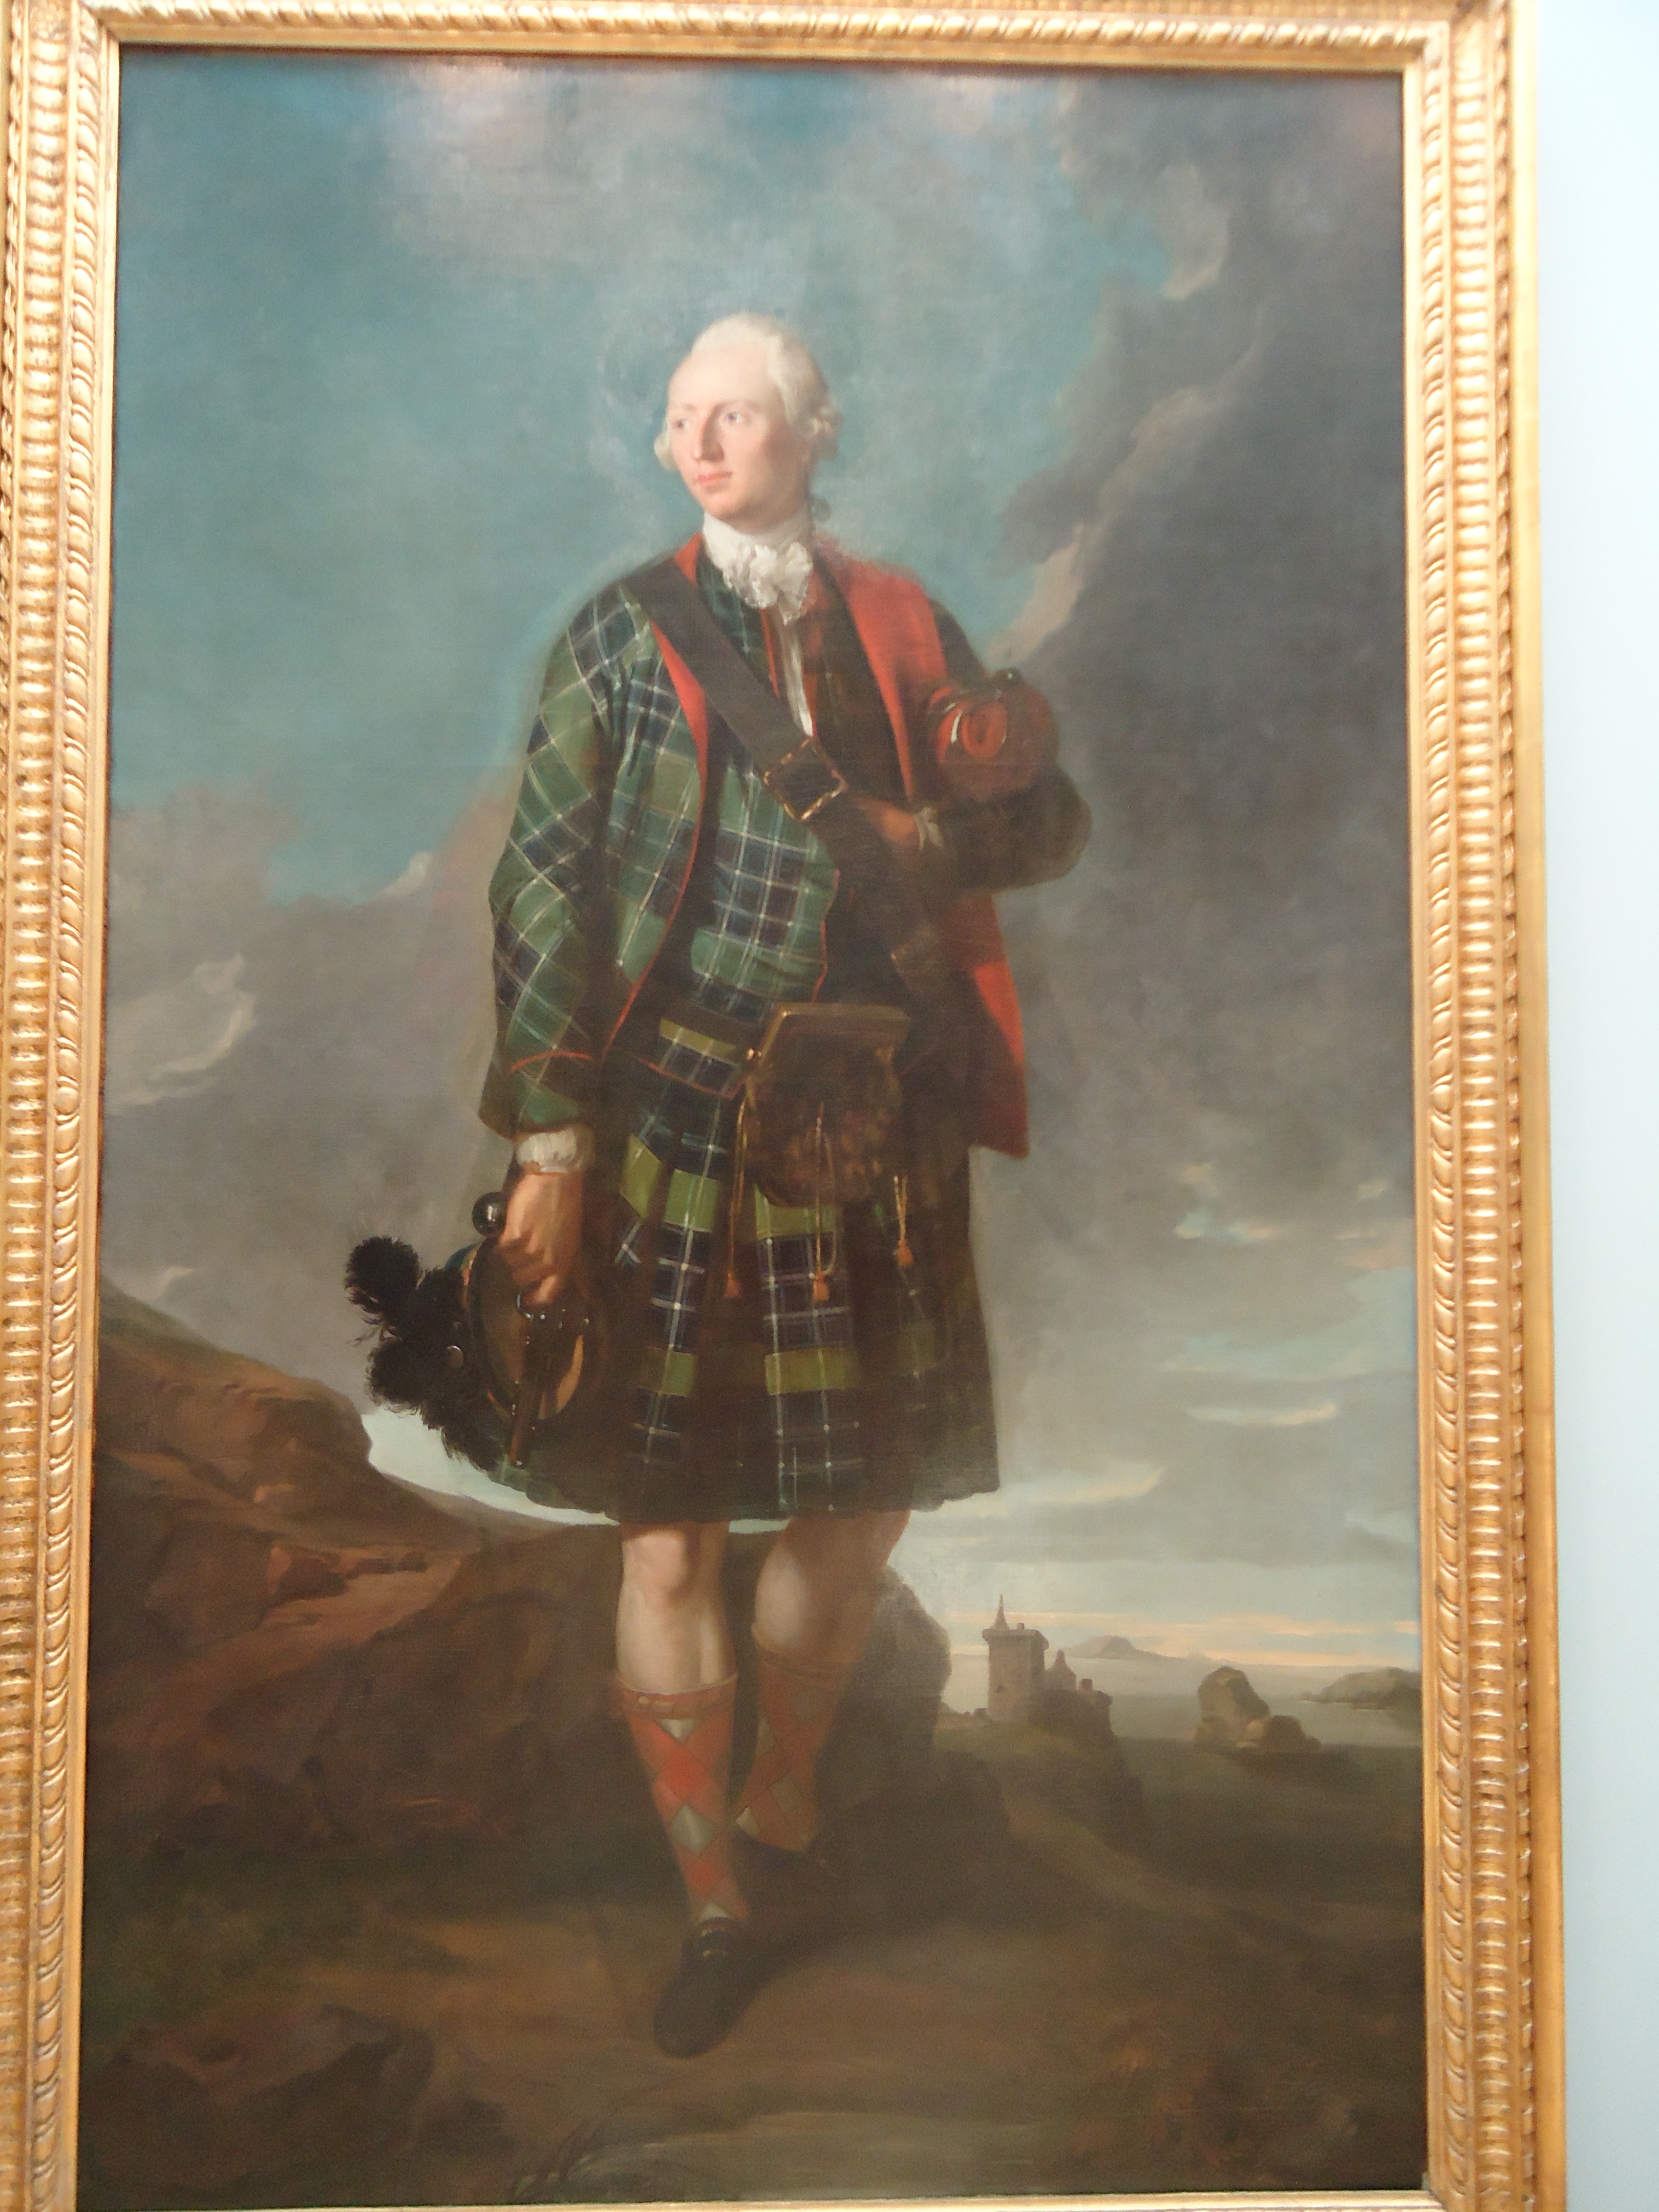 Sir Alistair MacDonald - attr Chalmers - 1772 - HandBound, late 18th century example of Scottish plaid in historical costume, mens historical costume, history of the kilt, 